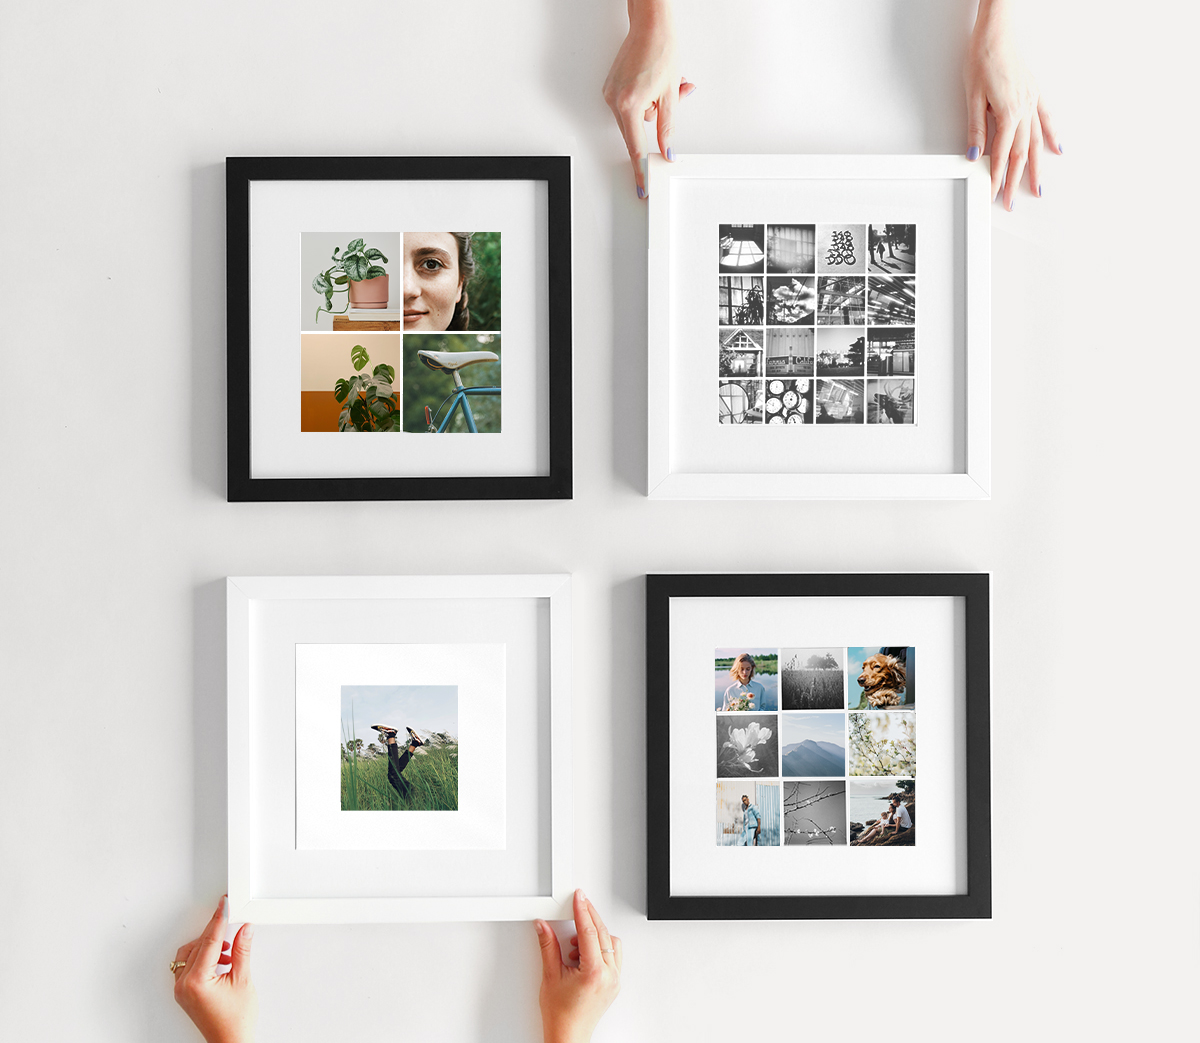 12x12 White Picture Frame For 12 x 12 Poster, Art & Photo